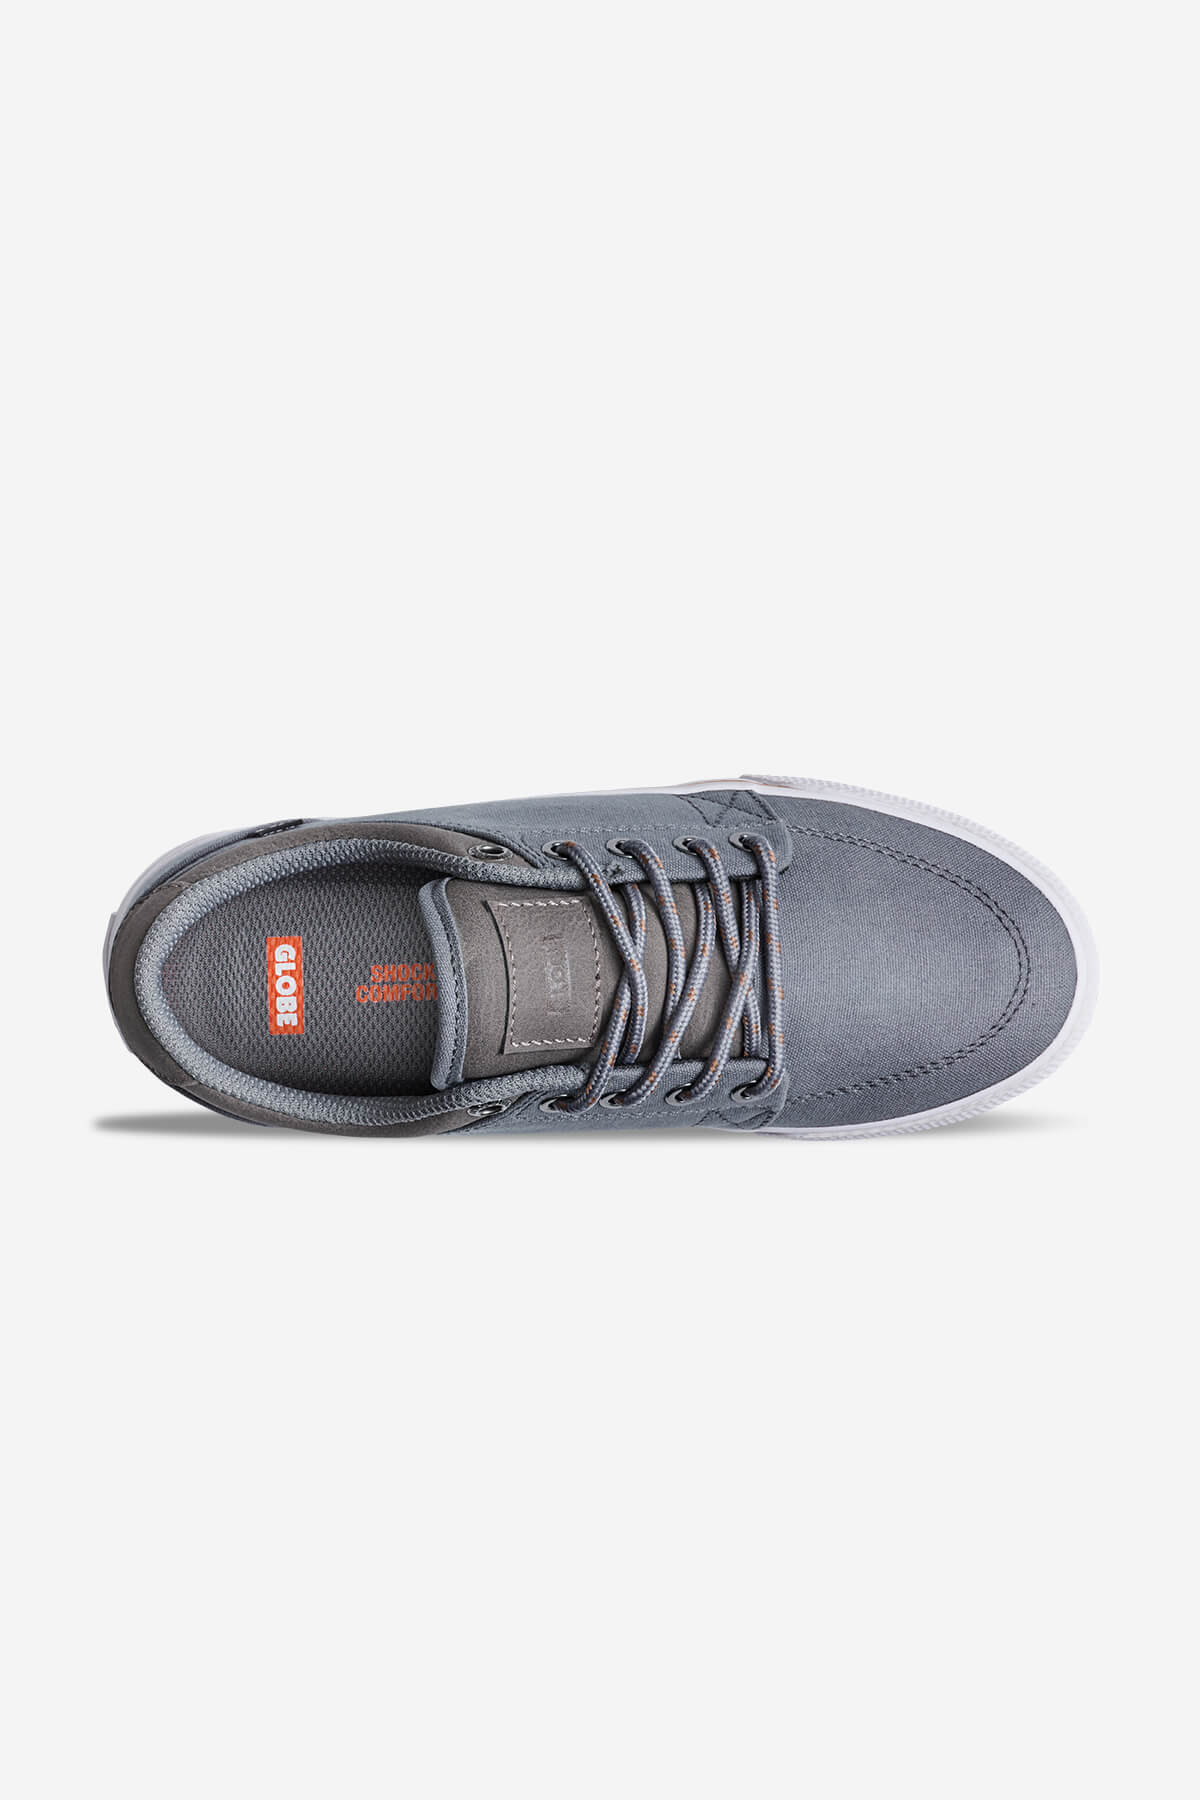 Globe Low shoes GS - Grey Canvas in Grey Canvas